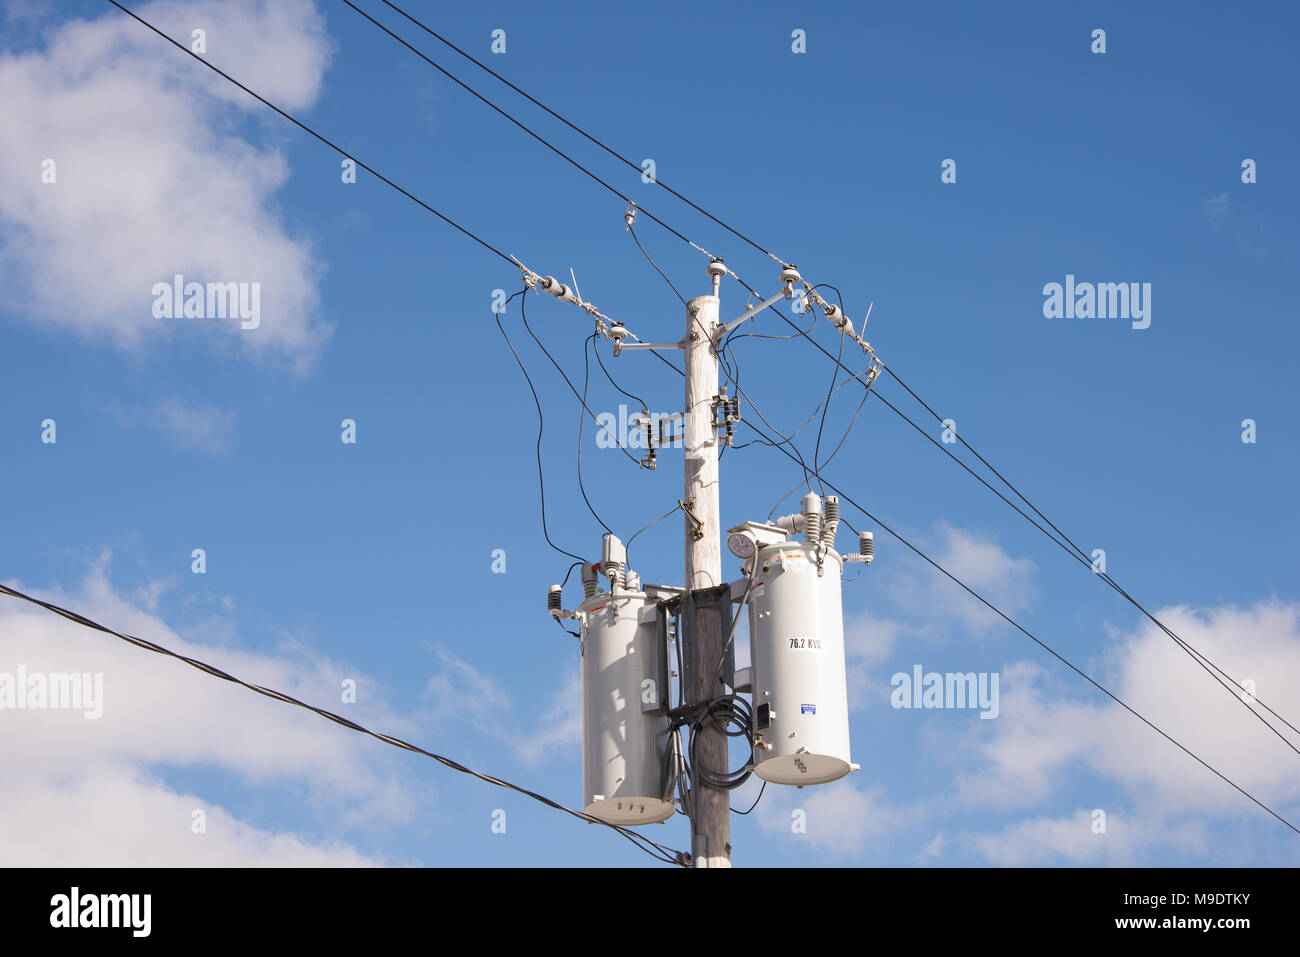 Two electric power transformers on a pole with wires, connectors and insulators with a deep blue sky and white cloud background. Stock Photo